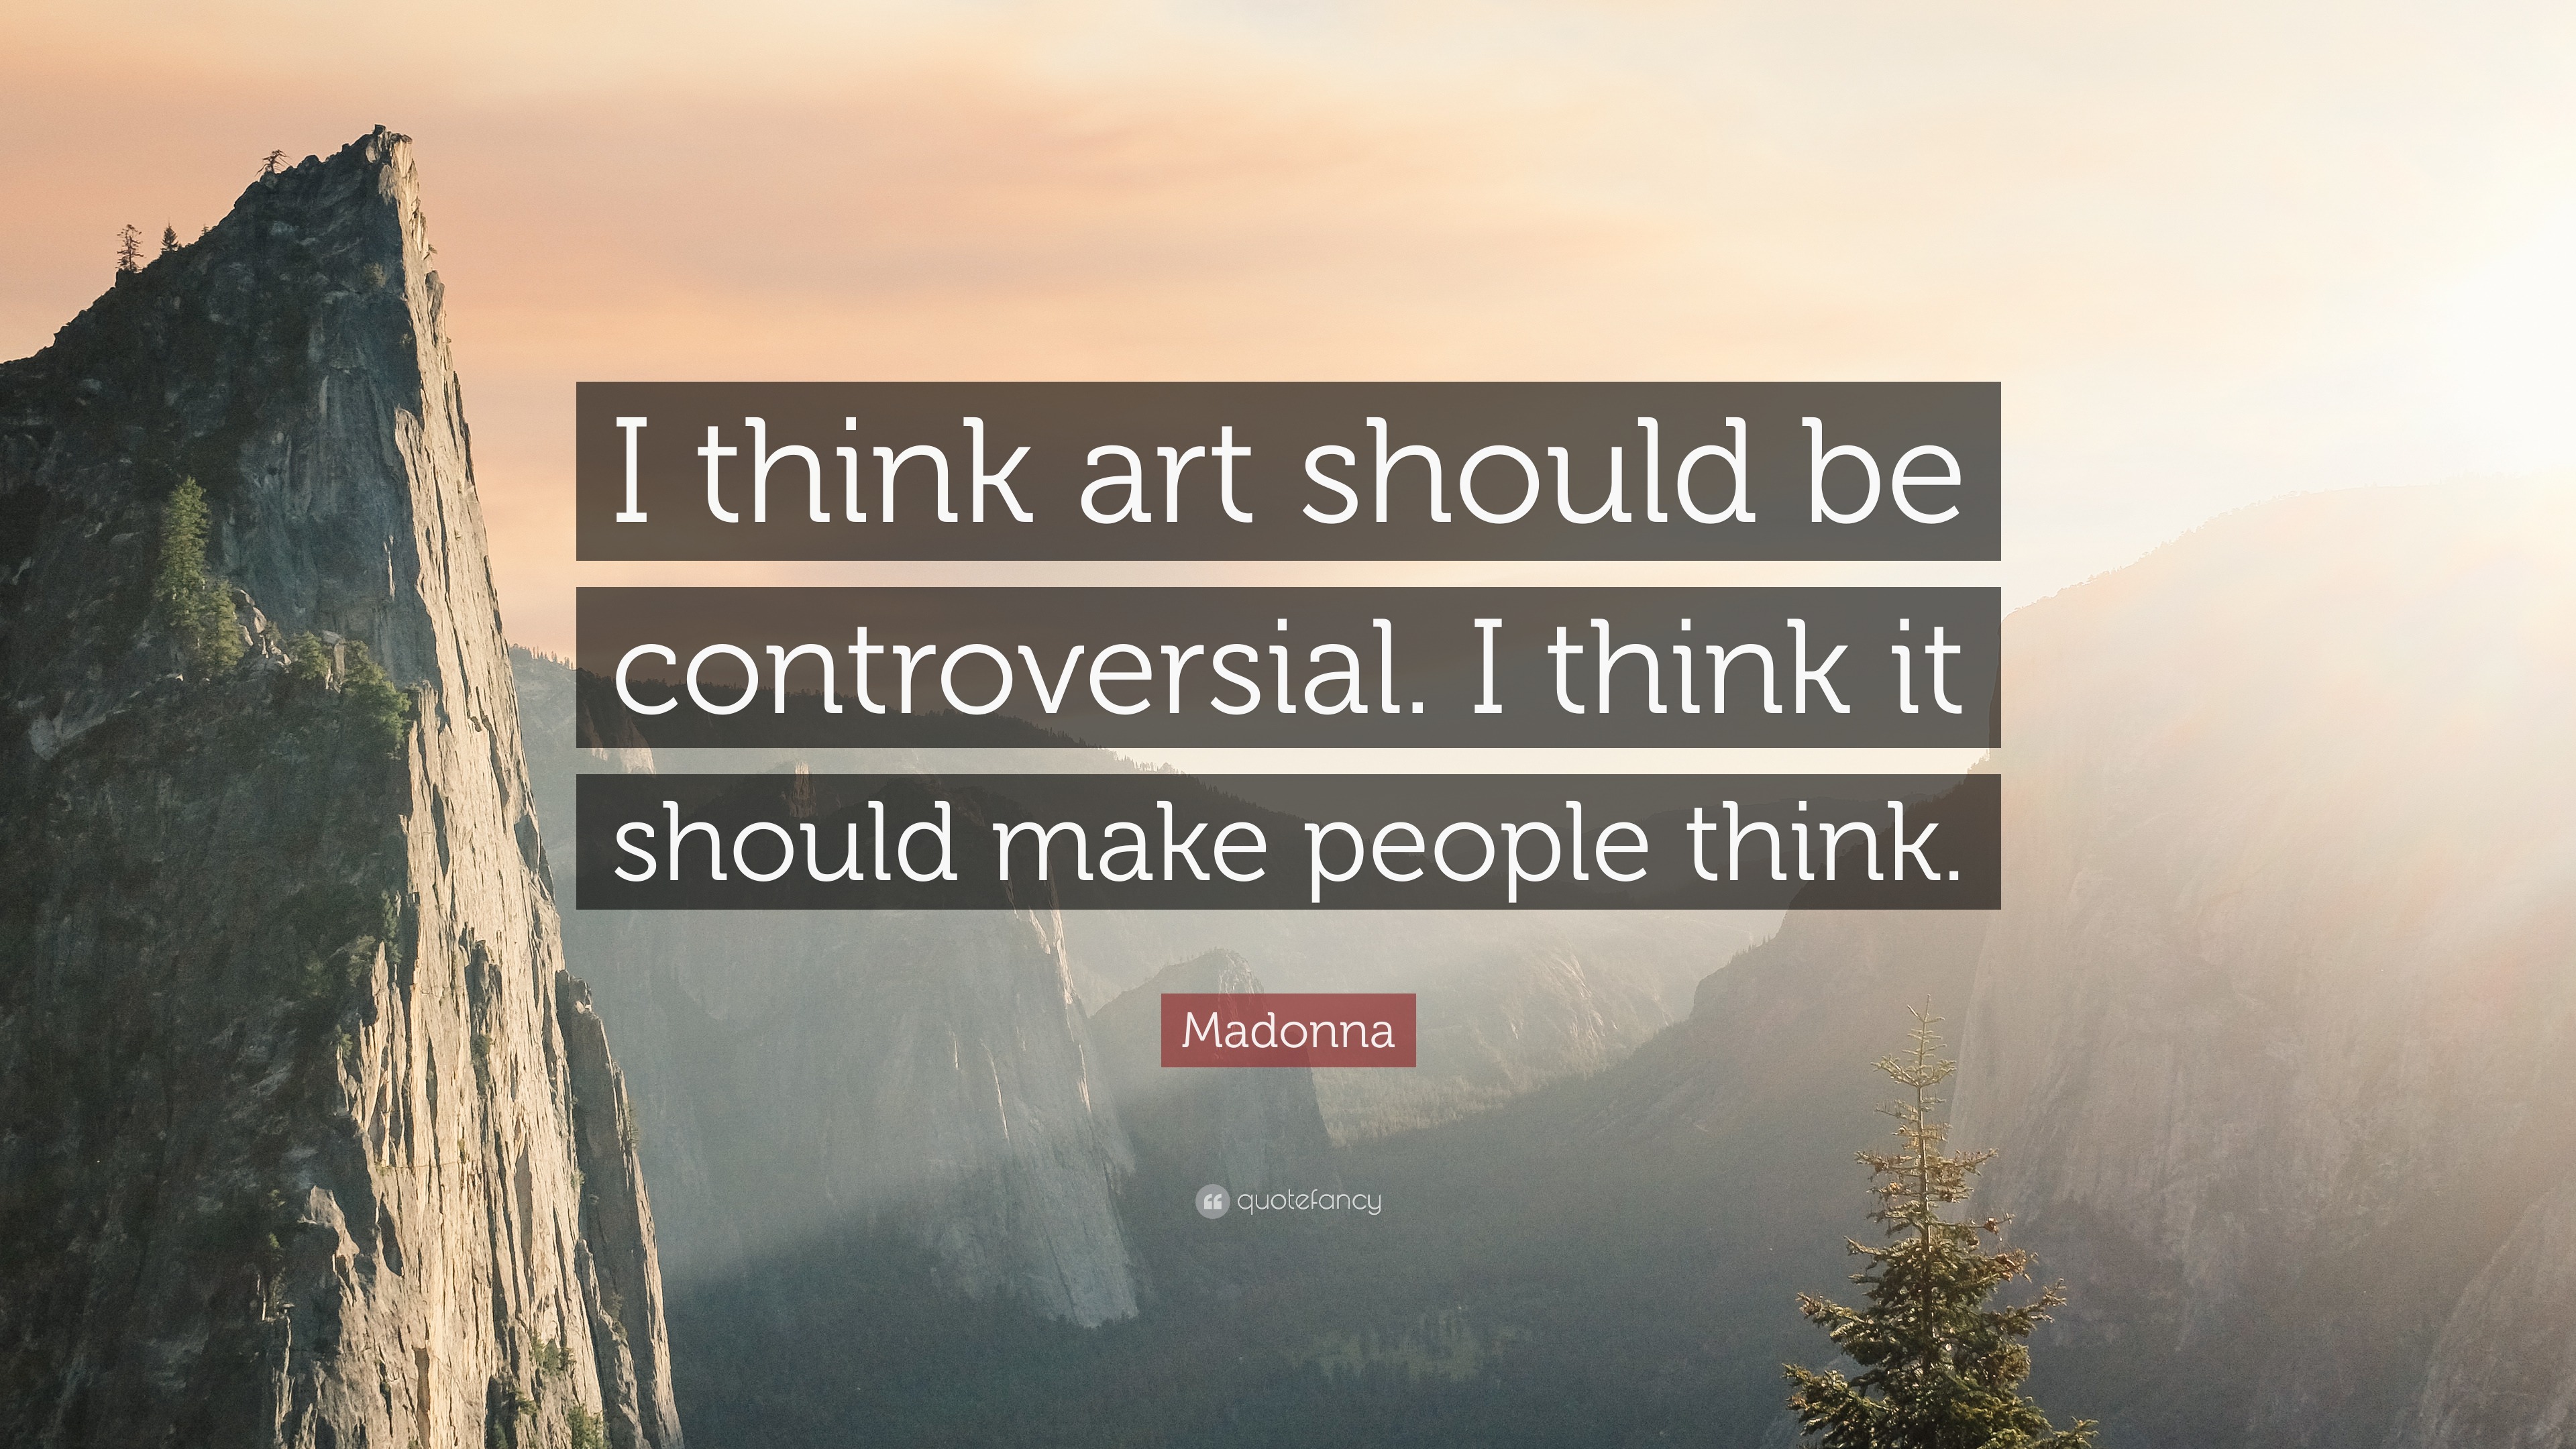 Madonna Quote: “I think art should be controversial. I think it should